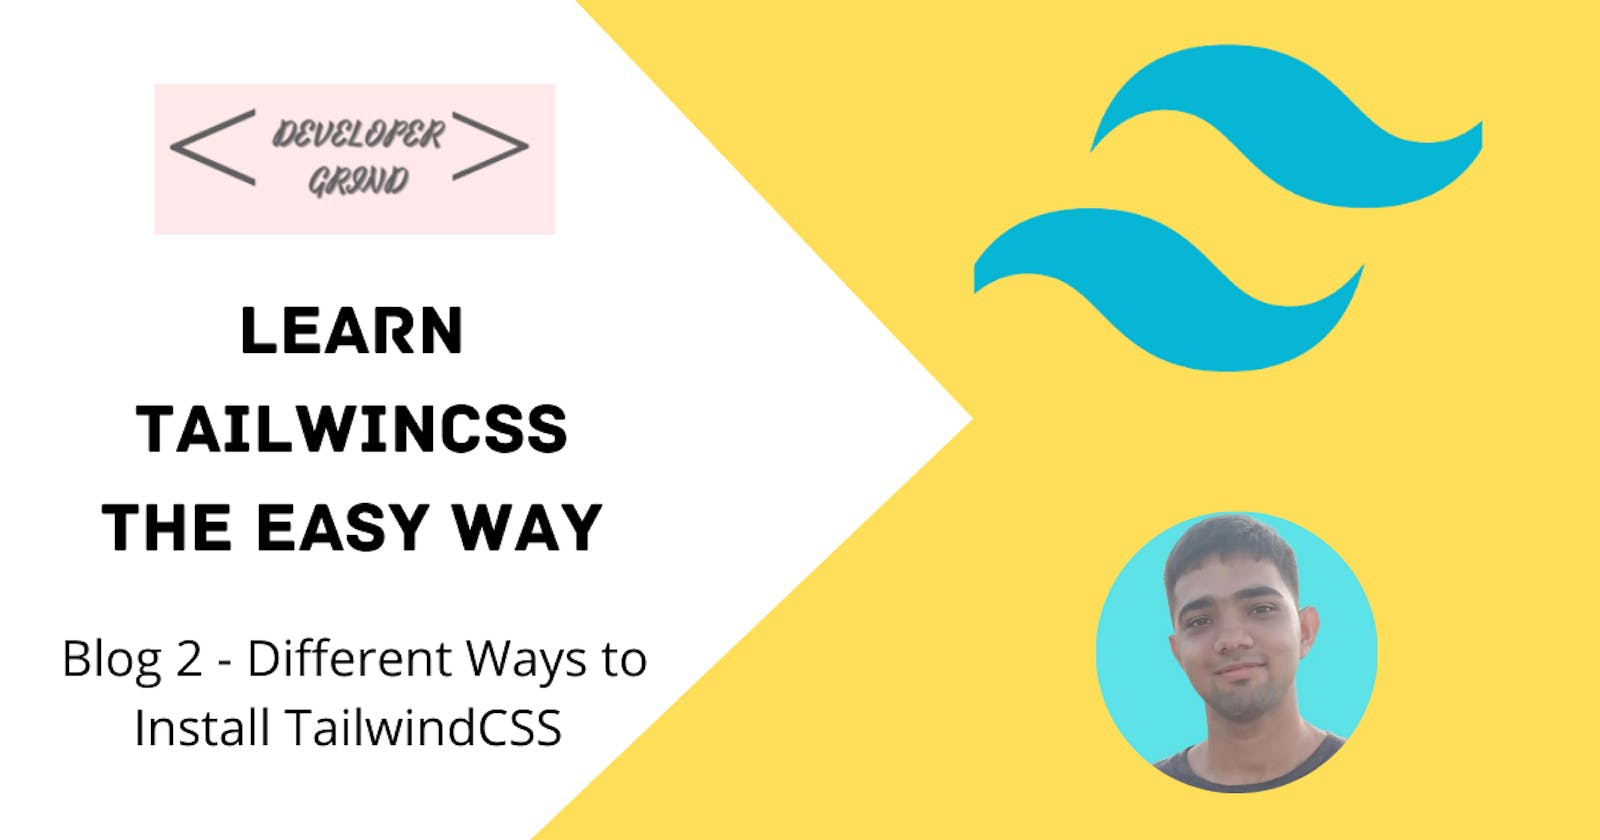 Different Ways to Install TaiwindCSS